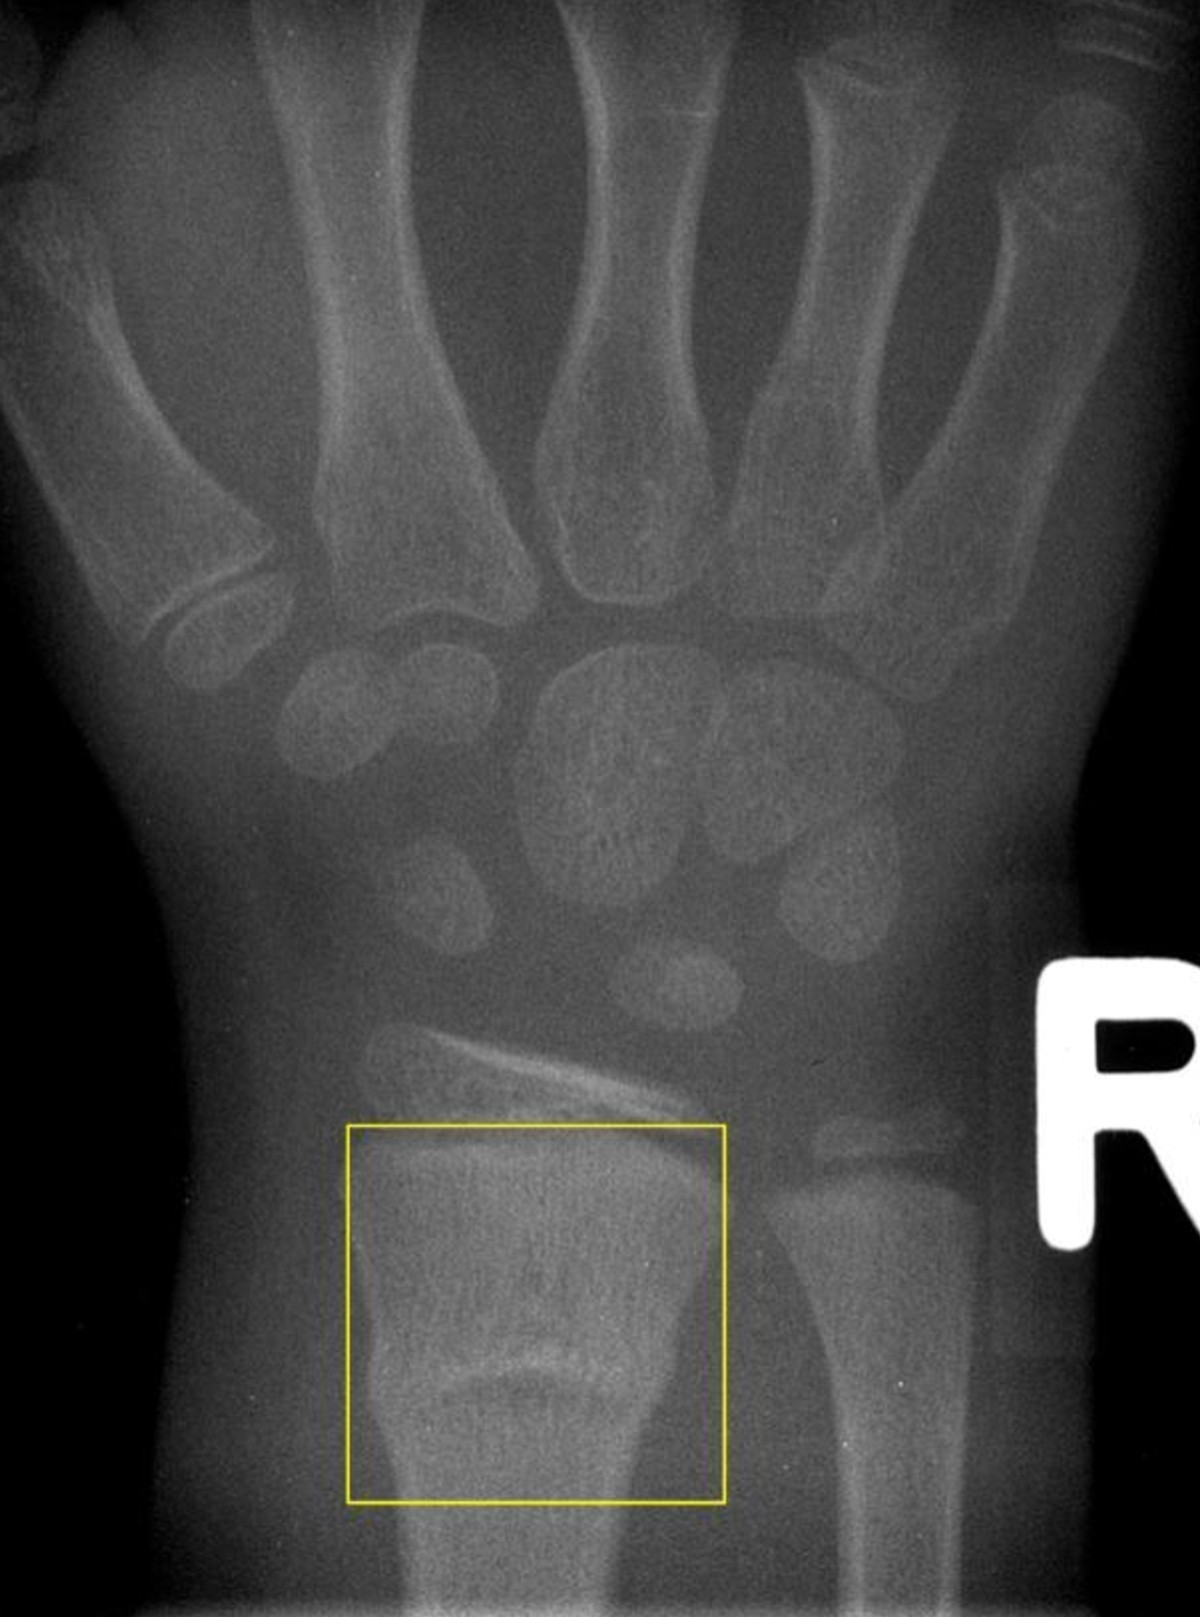 Development and validation of a paediatric long-bone fracture